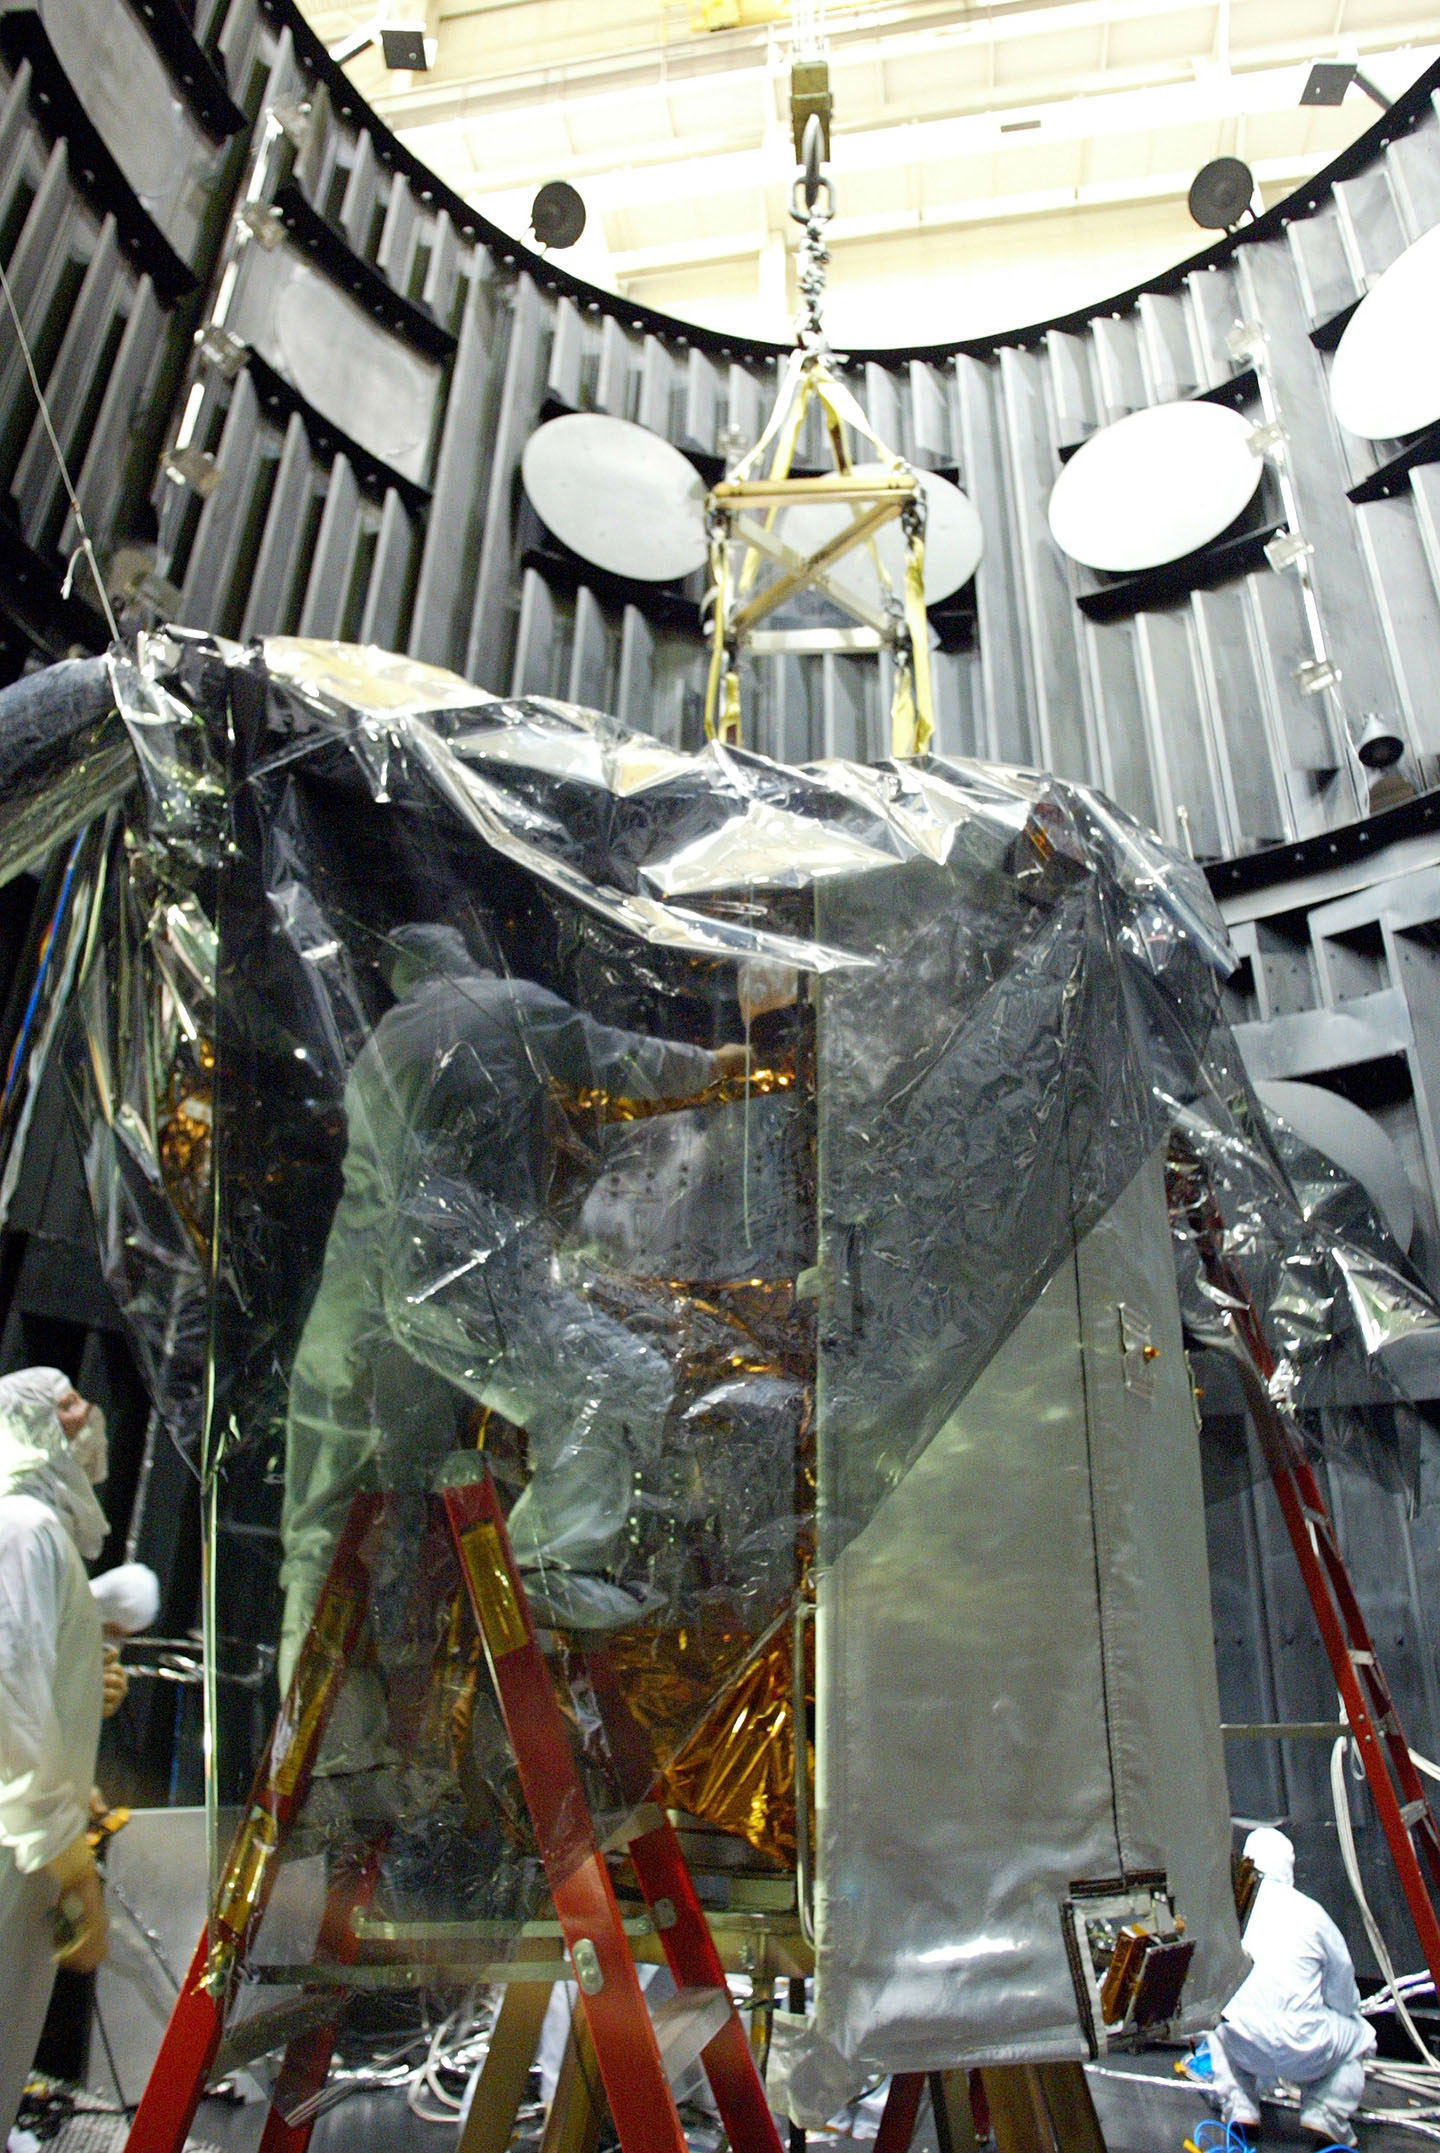 Engineers wrap the MESSENGER spacecraft in protective film before lifting it out of the thermal-vacuum chamber 